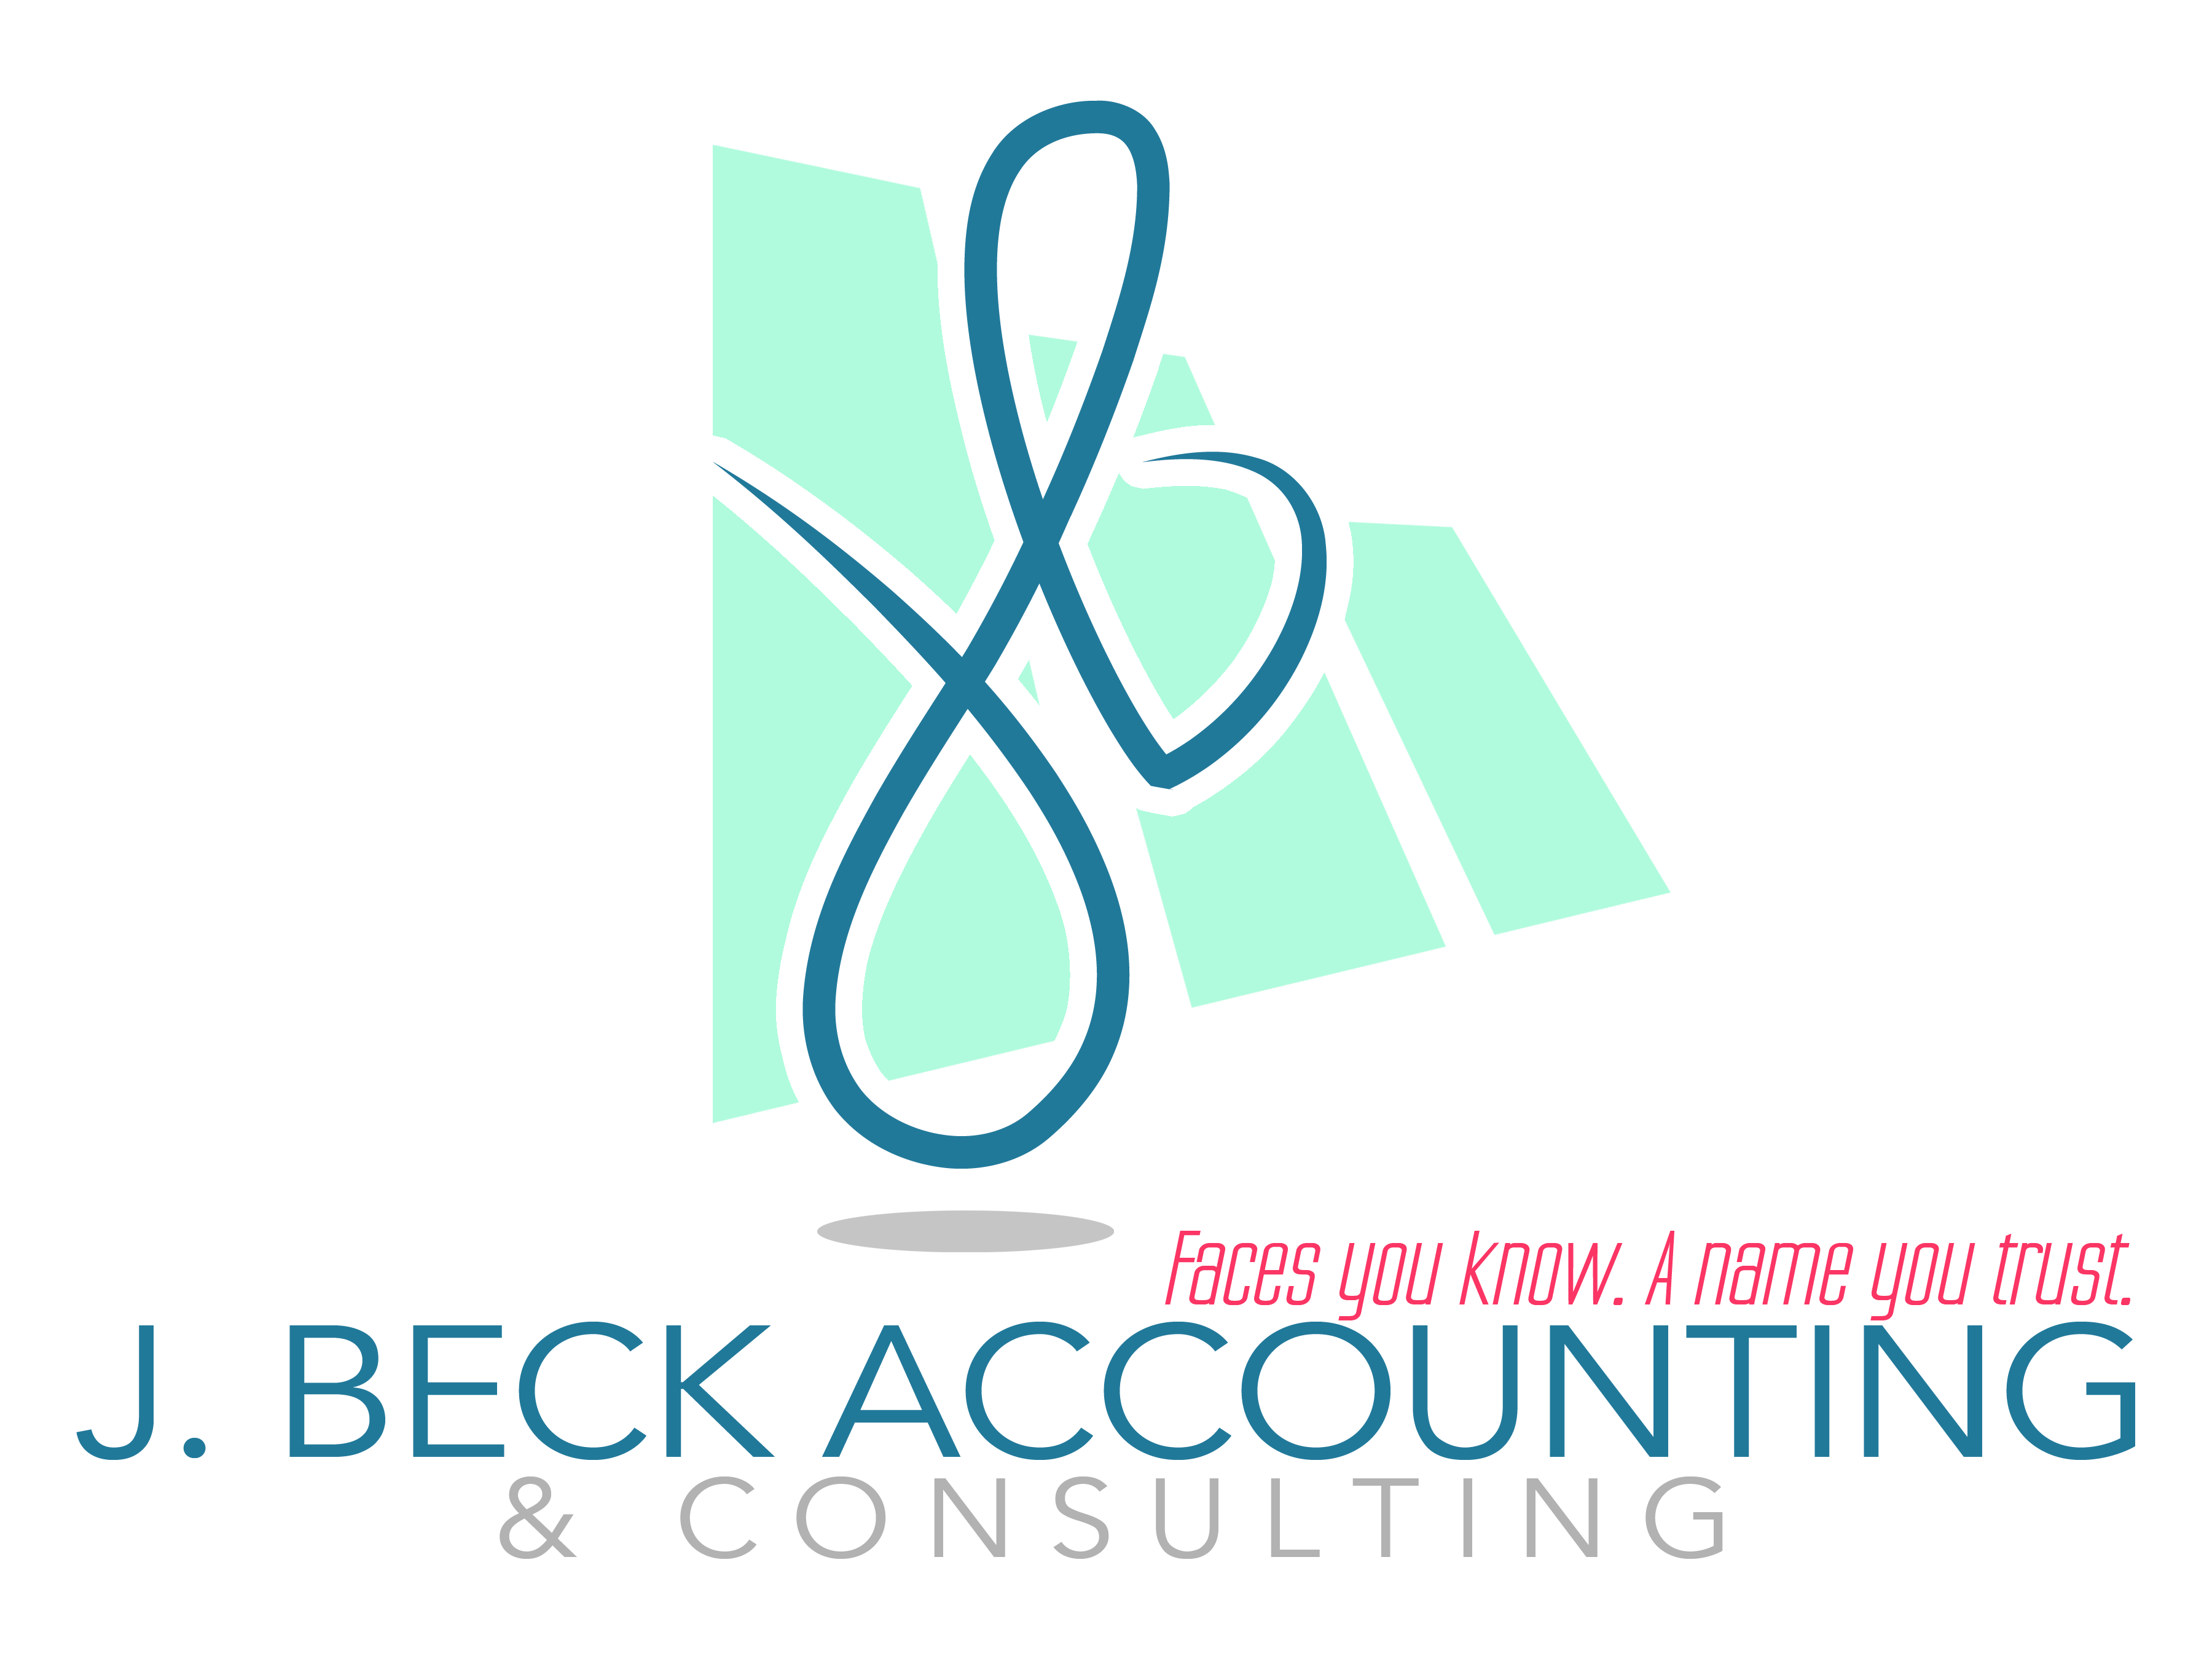 J Beck Accounting & Consulting